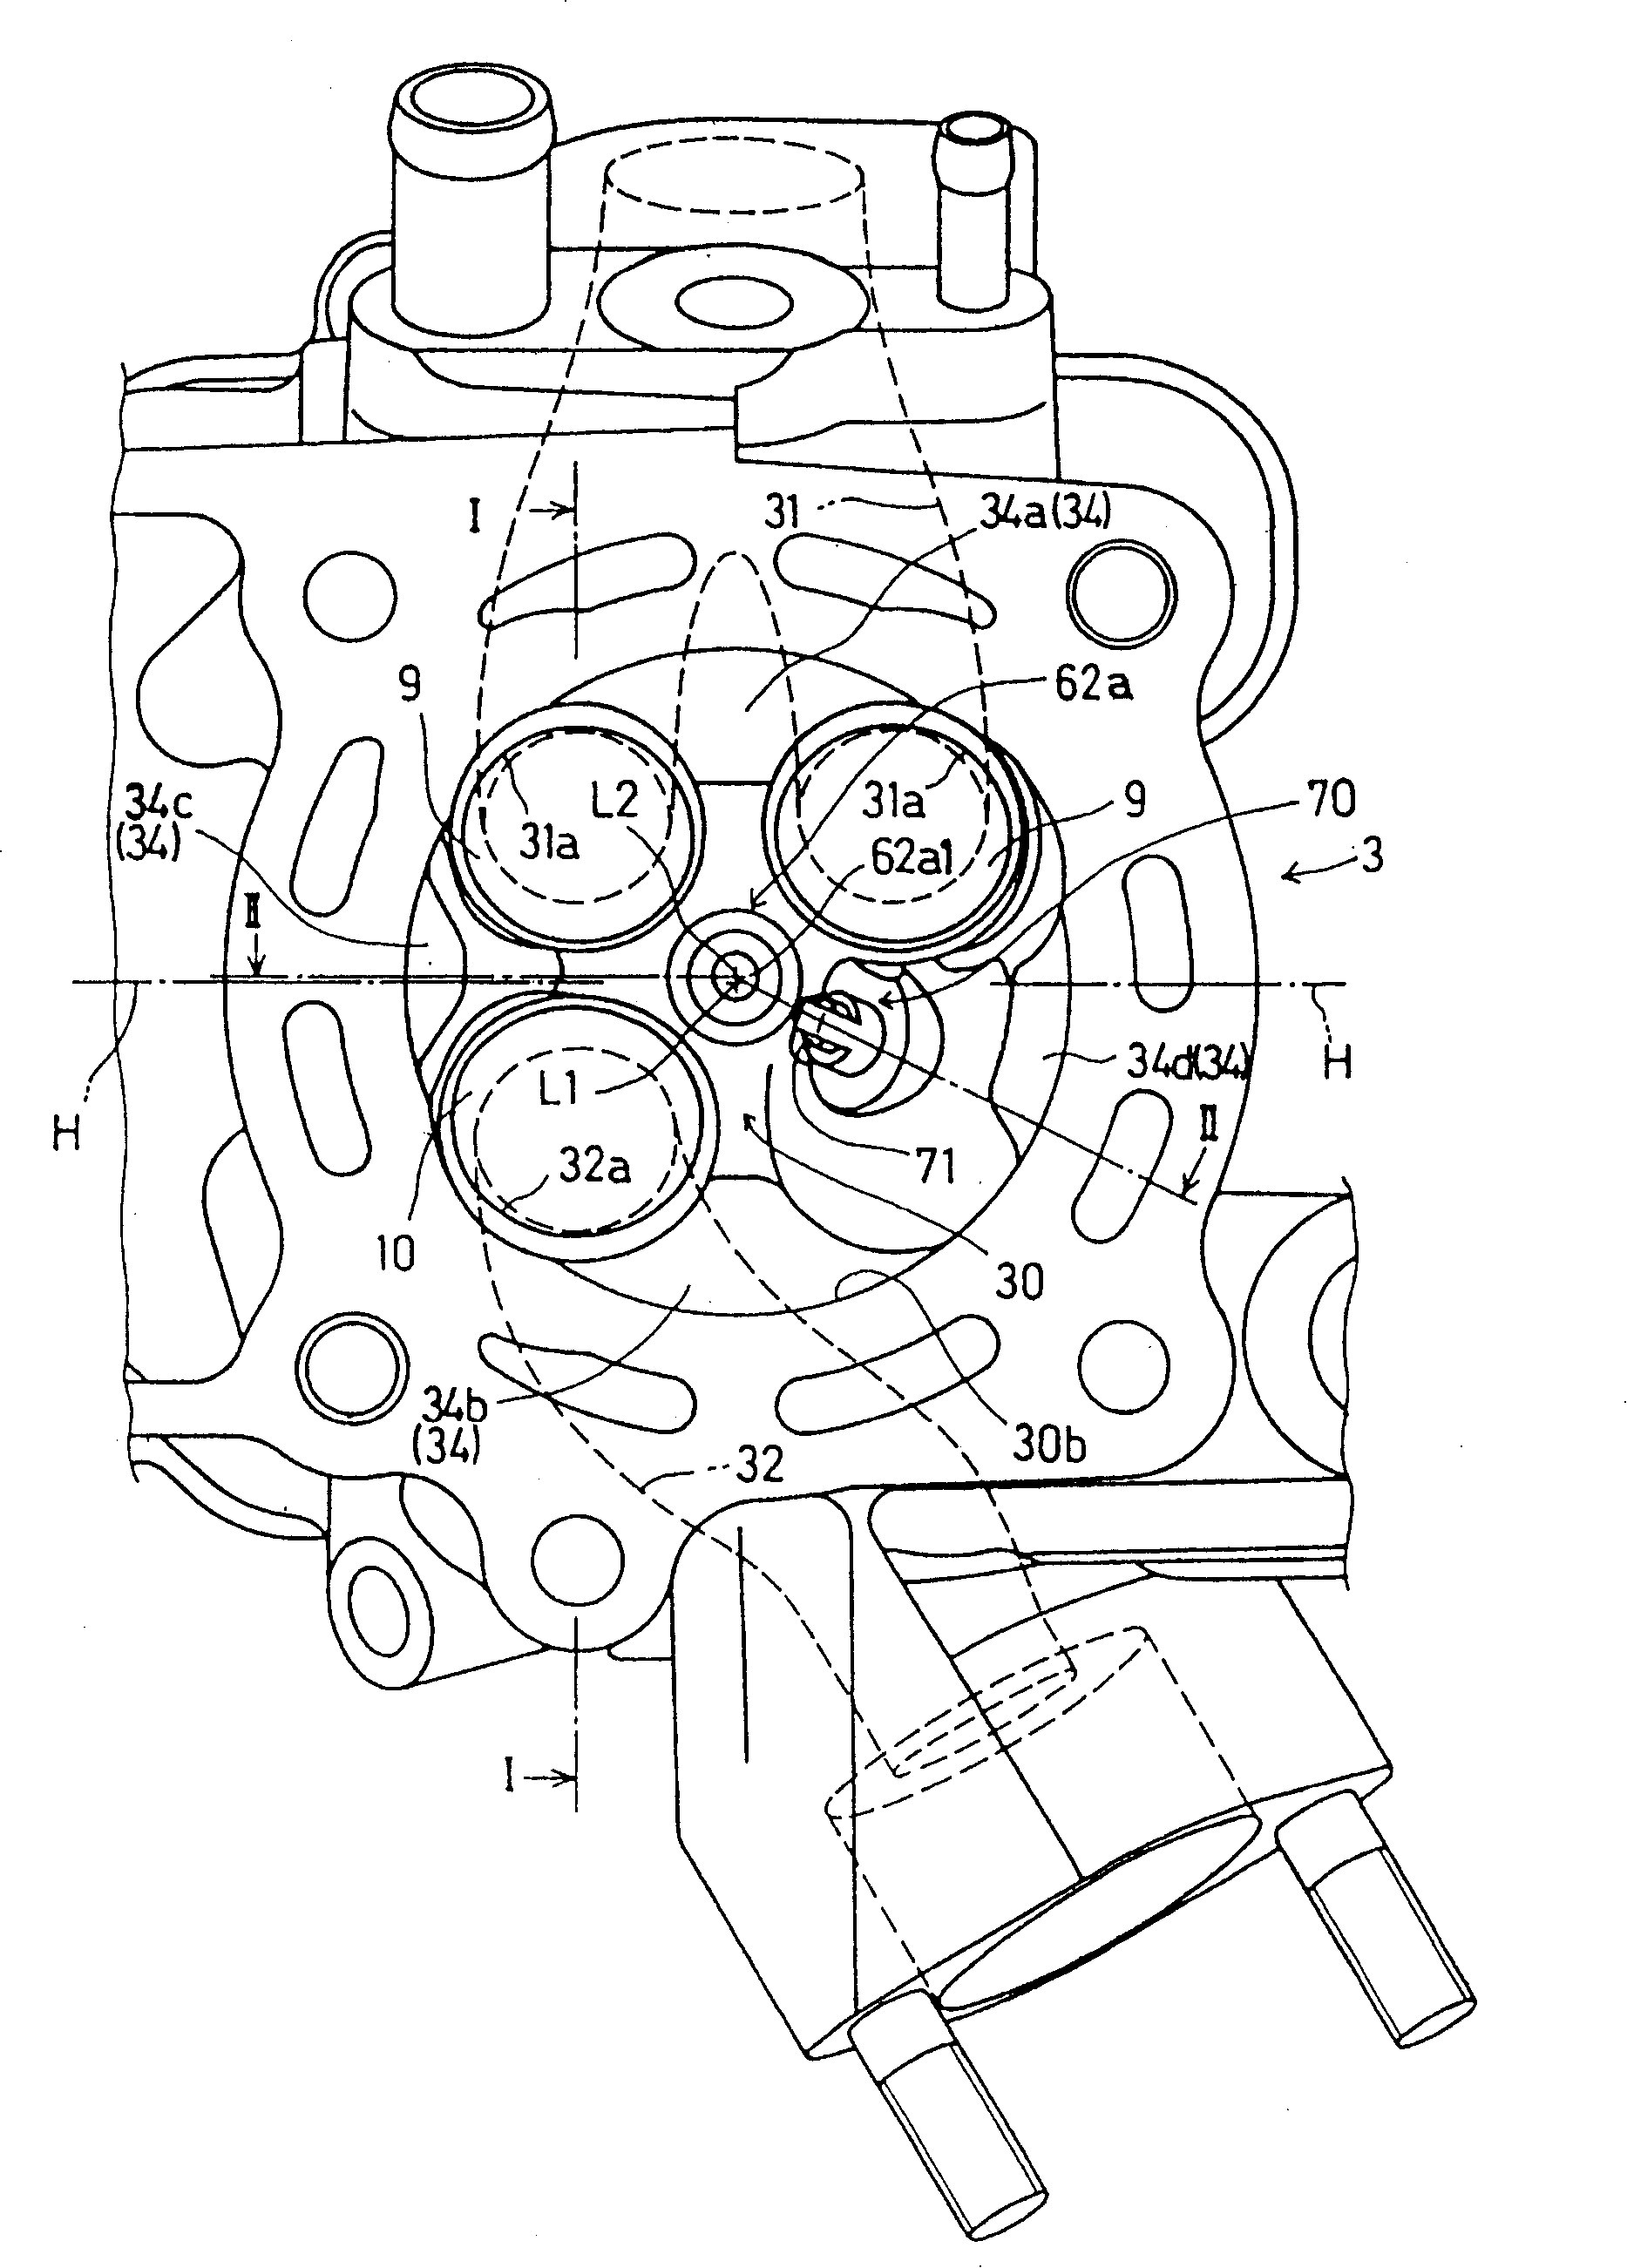 Fuel-direct-jetting type internal combustion engine